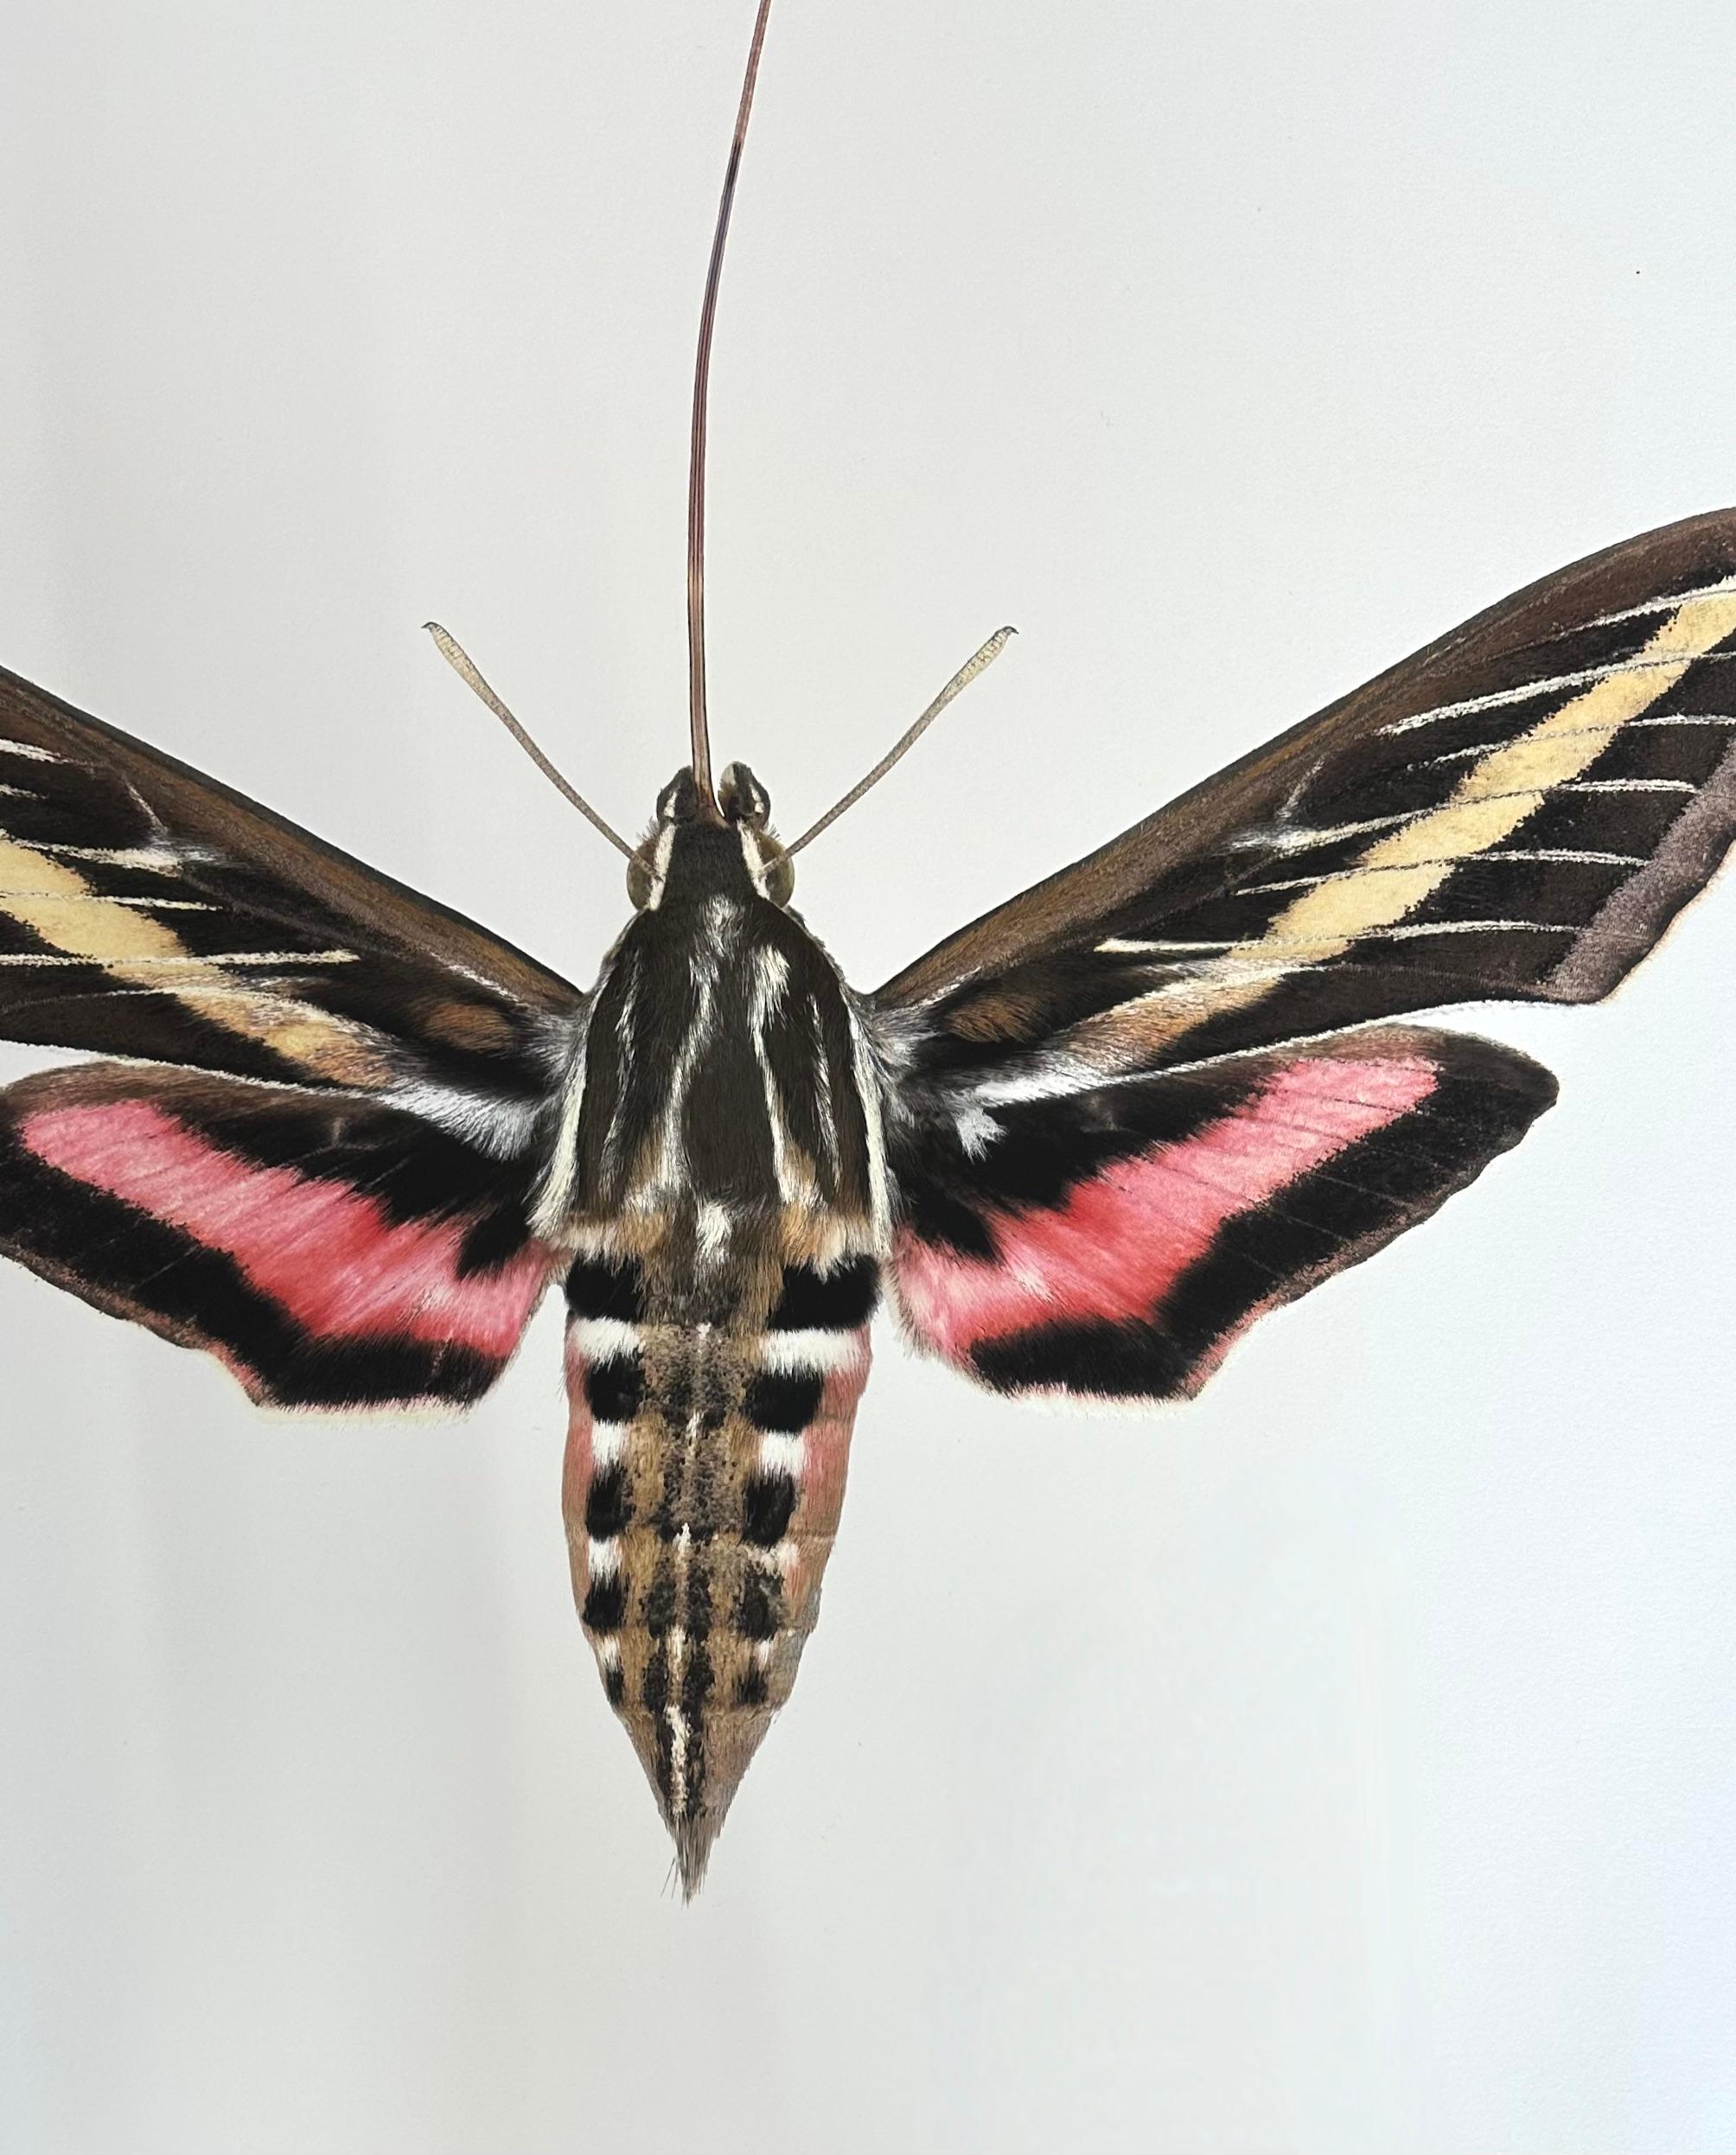 In this hyper-detailed archival pigment print on watercolor paper, a moth with yellow, pink and black markings on its wings and a long proboscis is dramatic against a solid white background. 

Price shown is the unframed price. Please inquire with